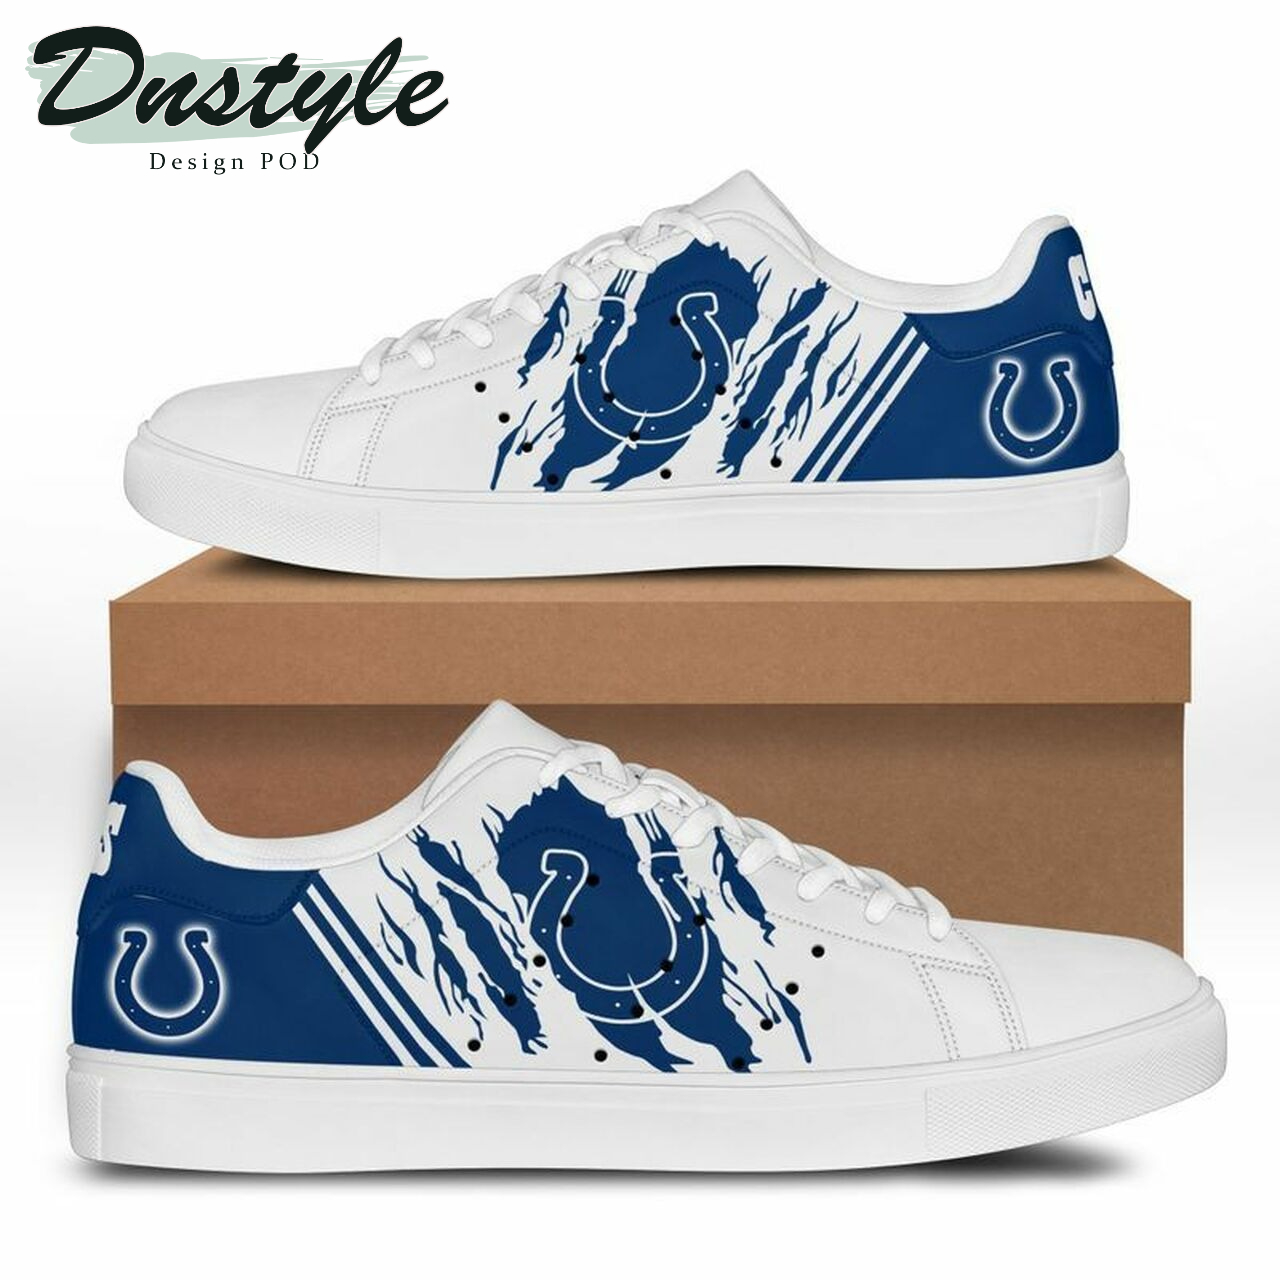 NFL stan smith low top skate shoes indianapolis colts